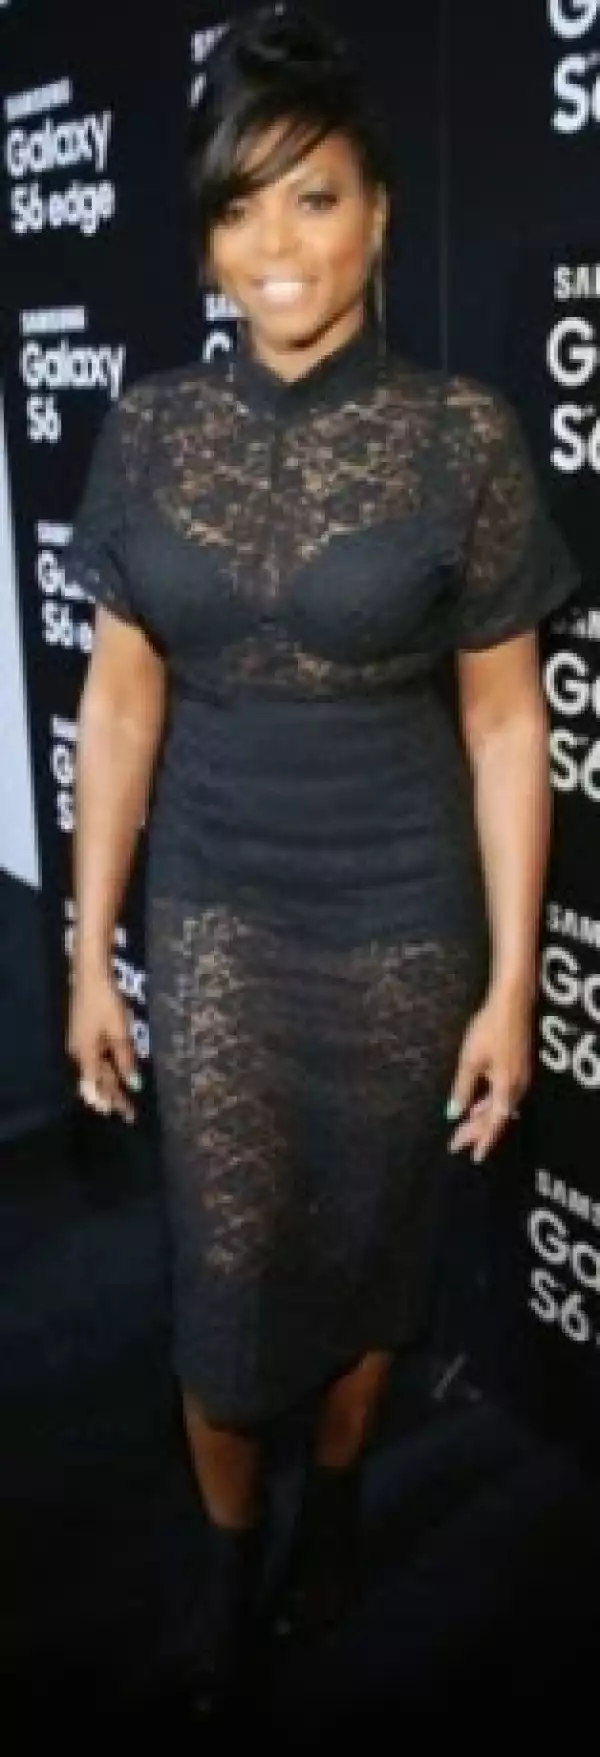 Taraji P. Henson Steps Out In See-Through Dress